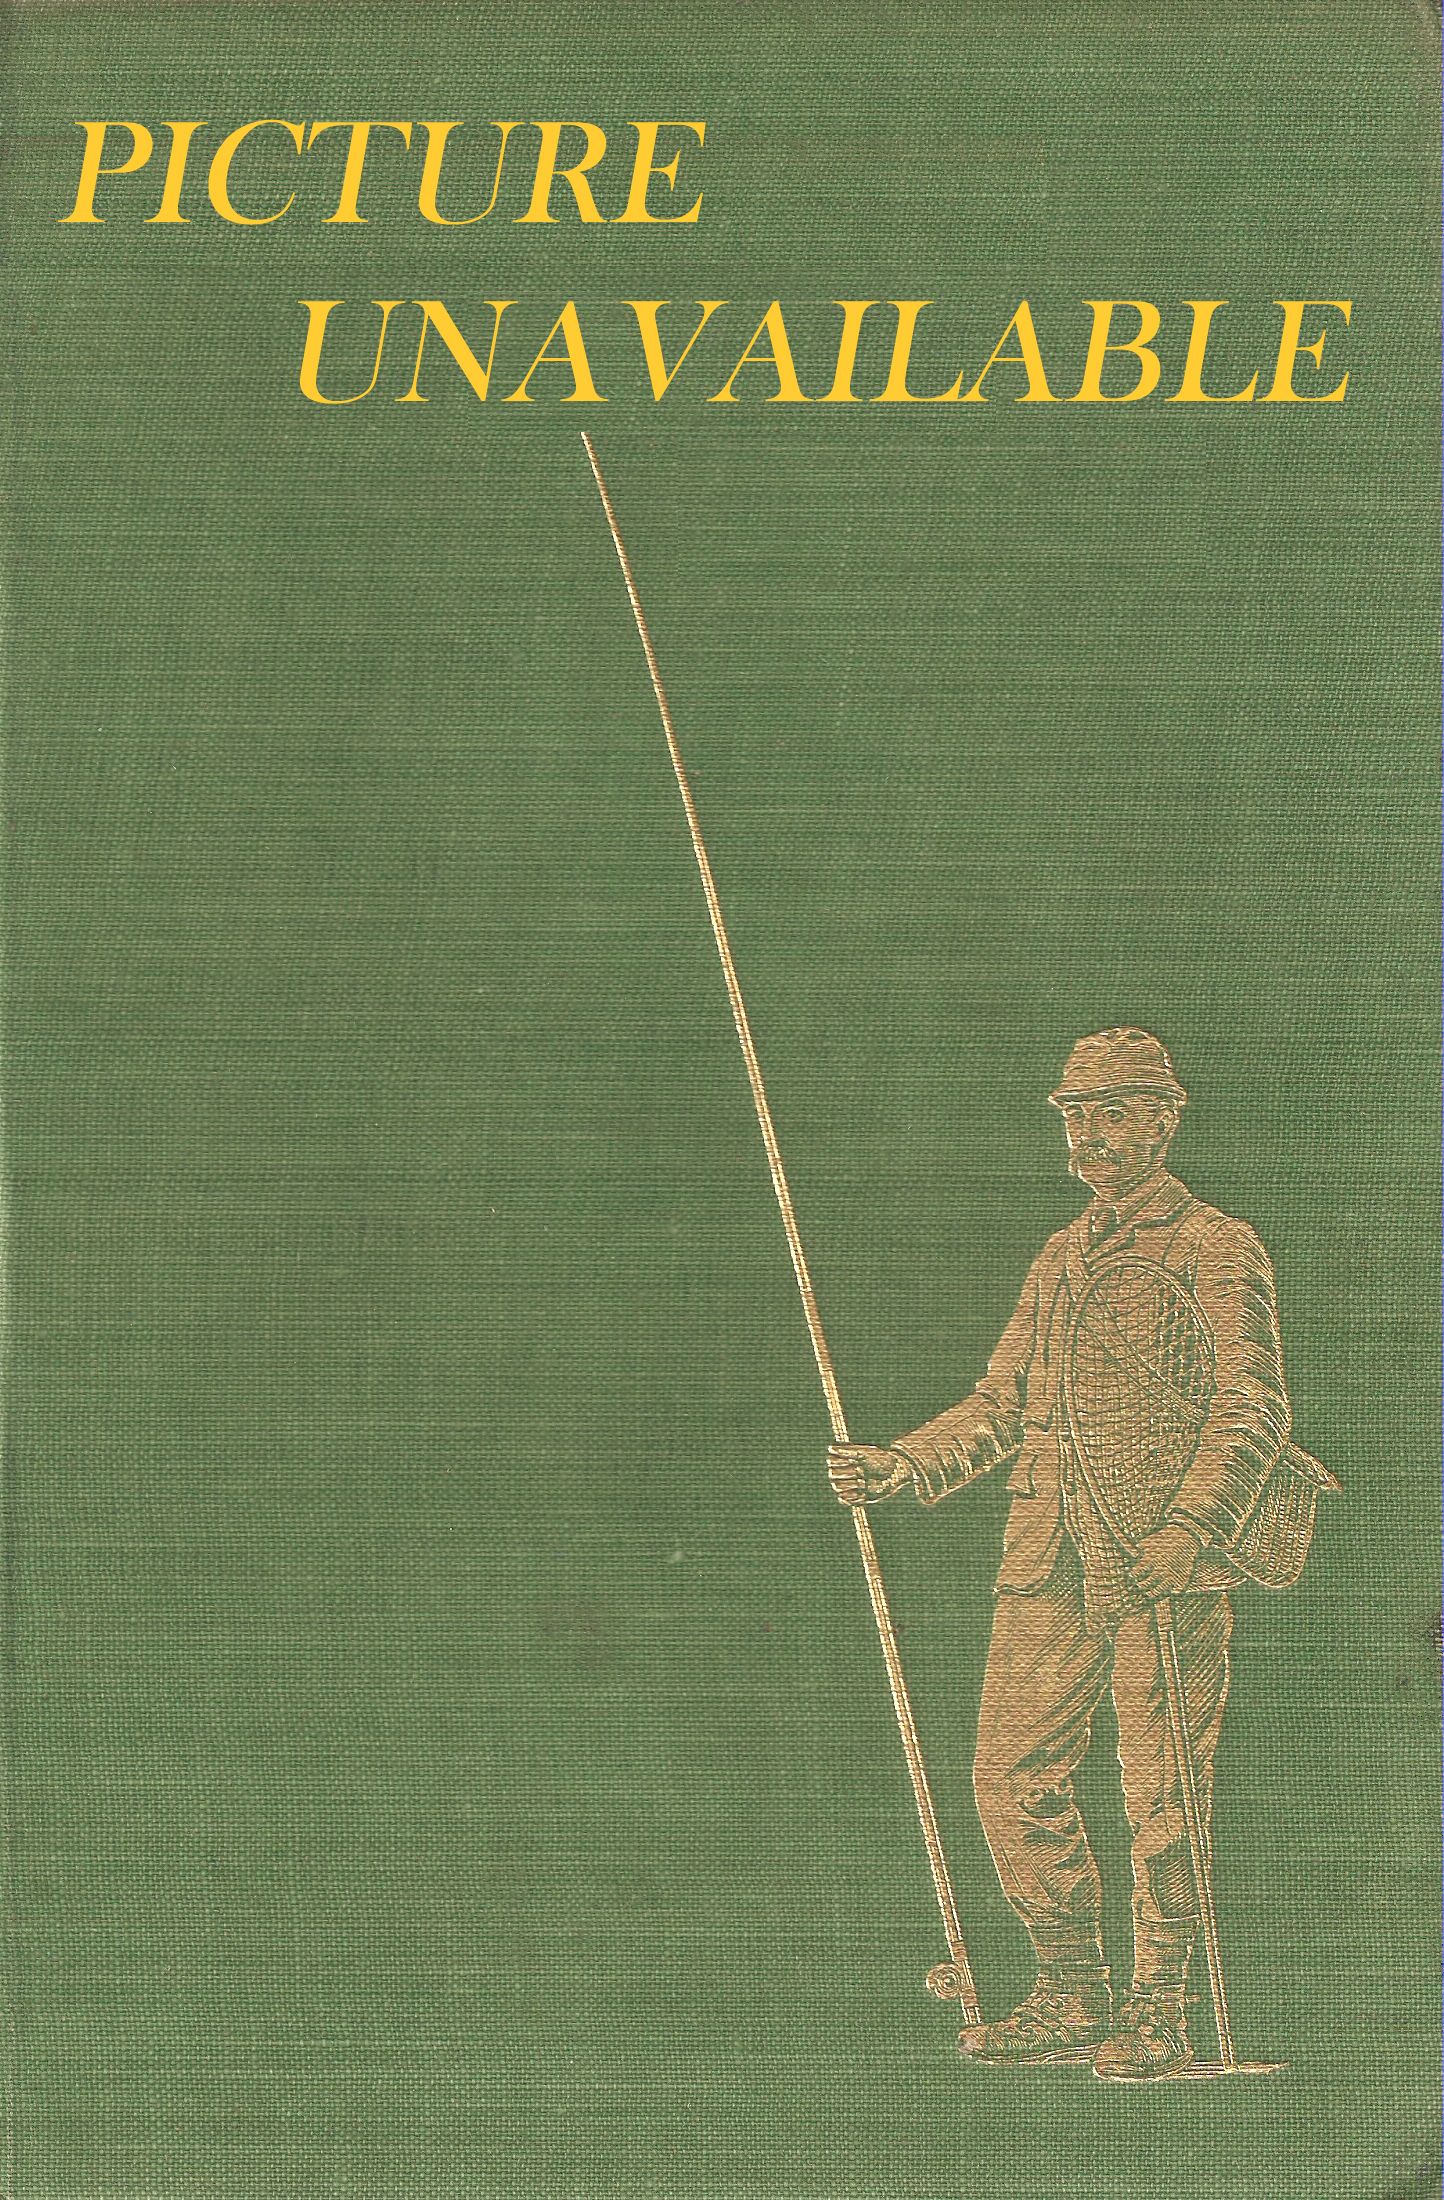 WALTON AND SOME EARLIER WRITERS ON FISH AND FISHING. By R.B. Marston.  First edition, standard cloth issue - Issue A.